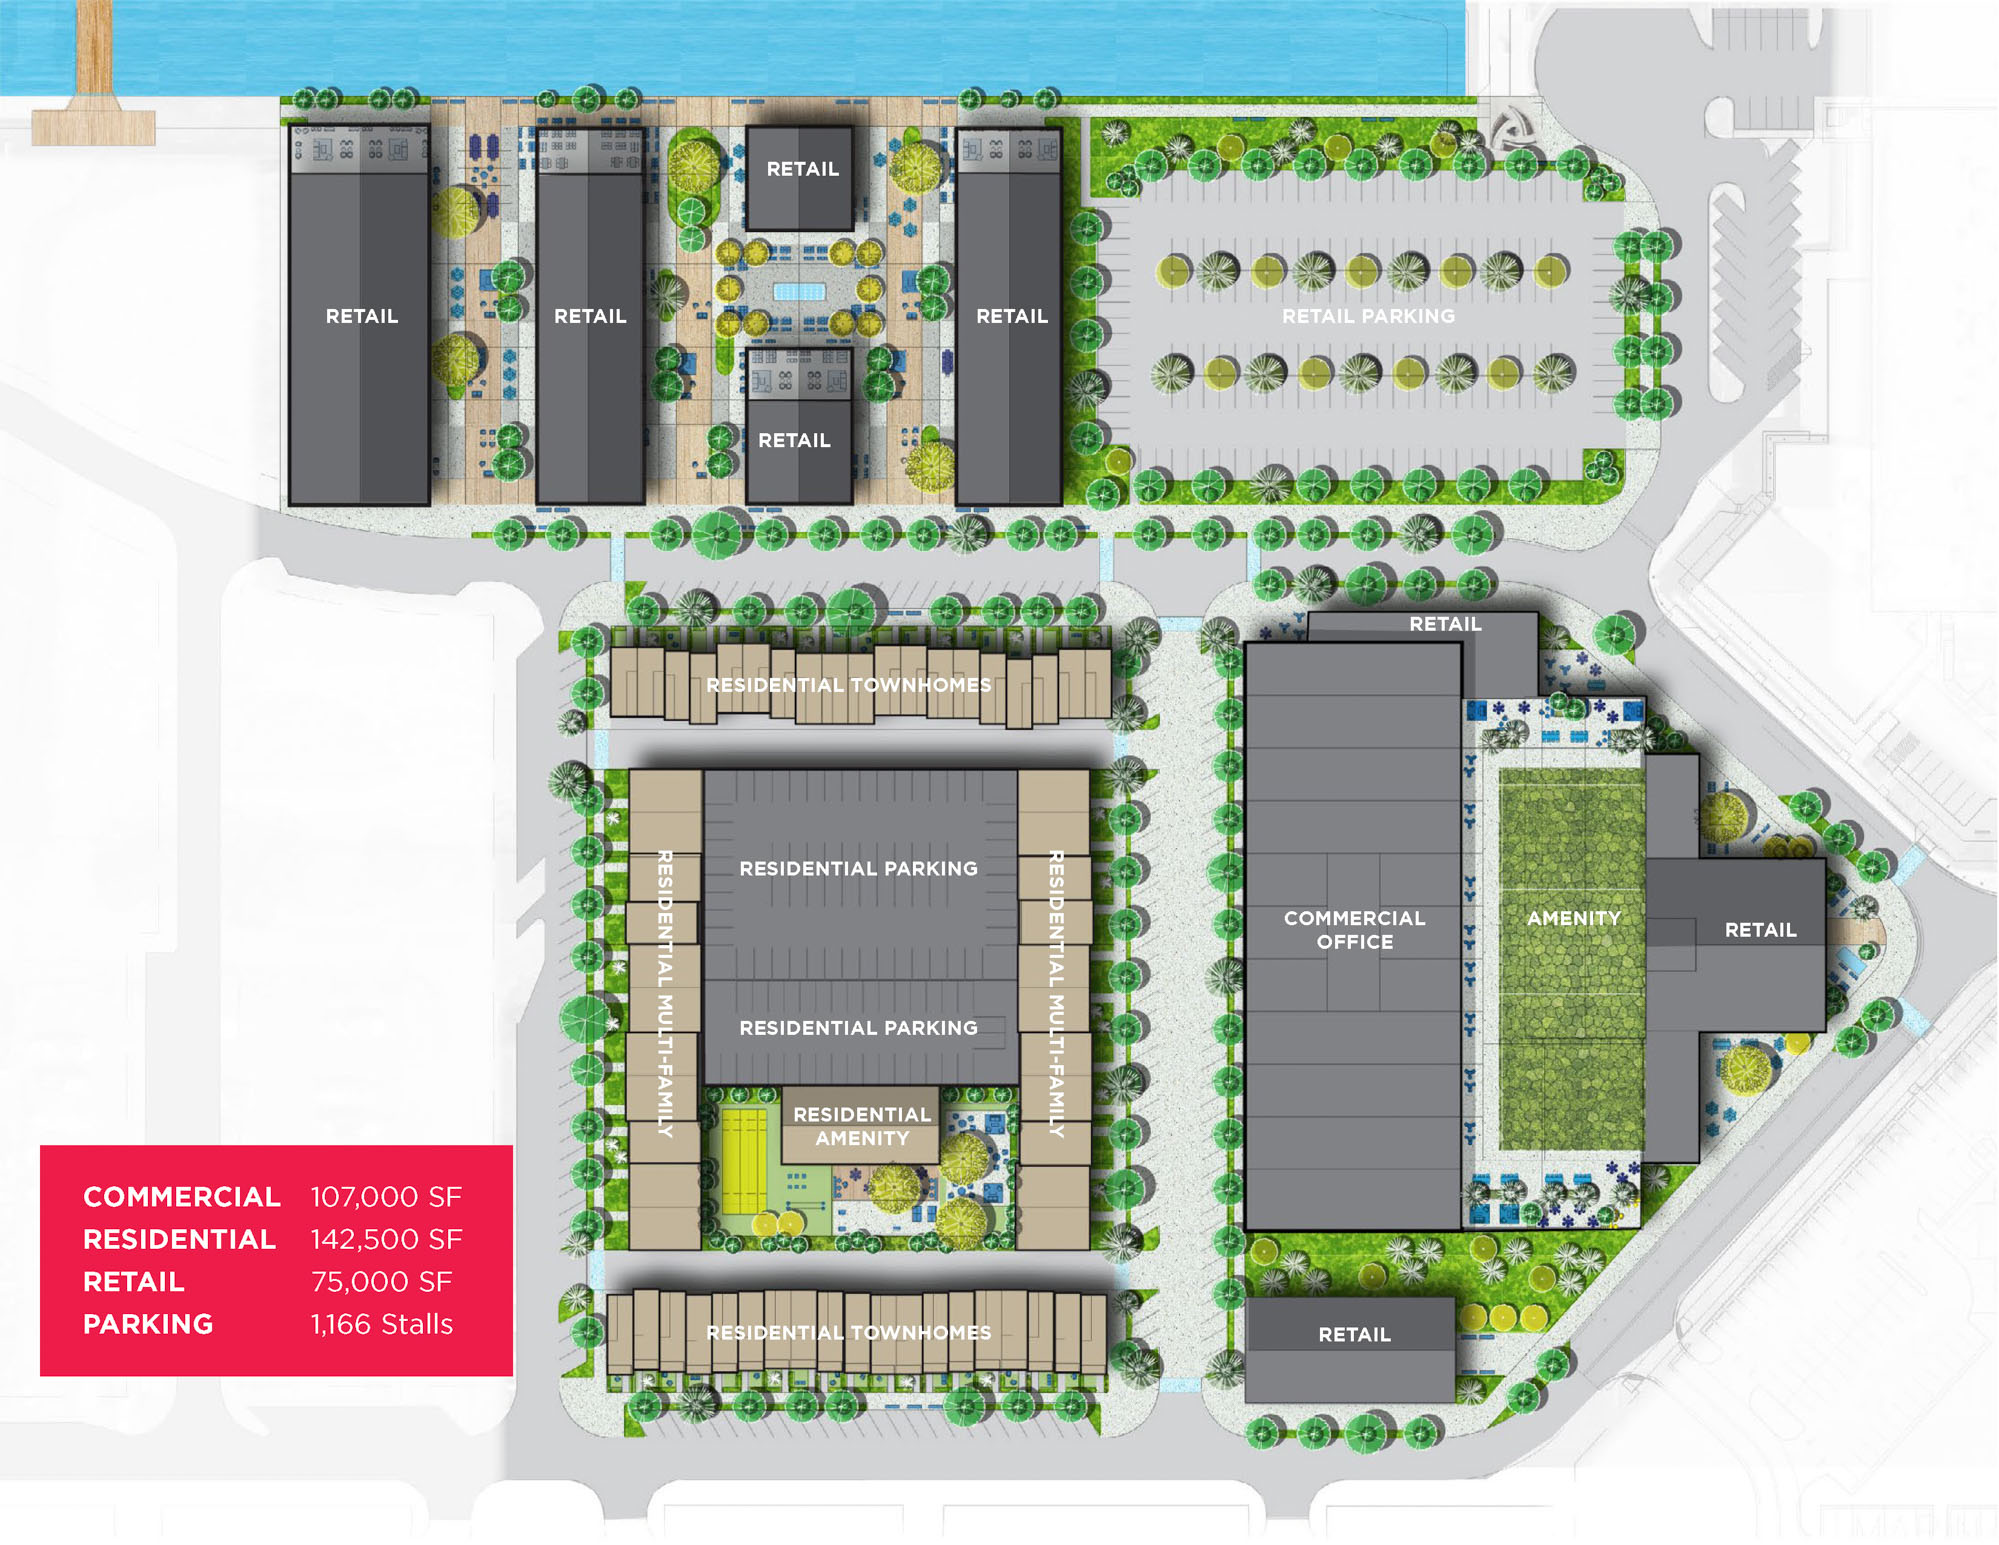 Site plan of Millwright District showing the retail, residential, and commercial building spaces